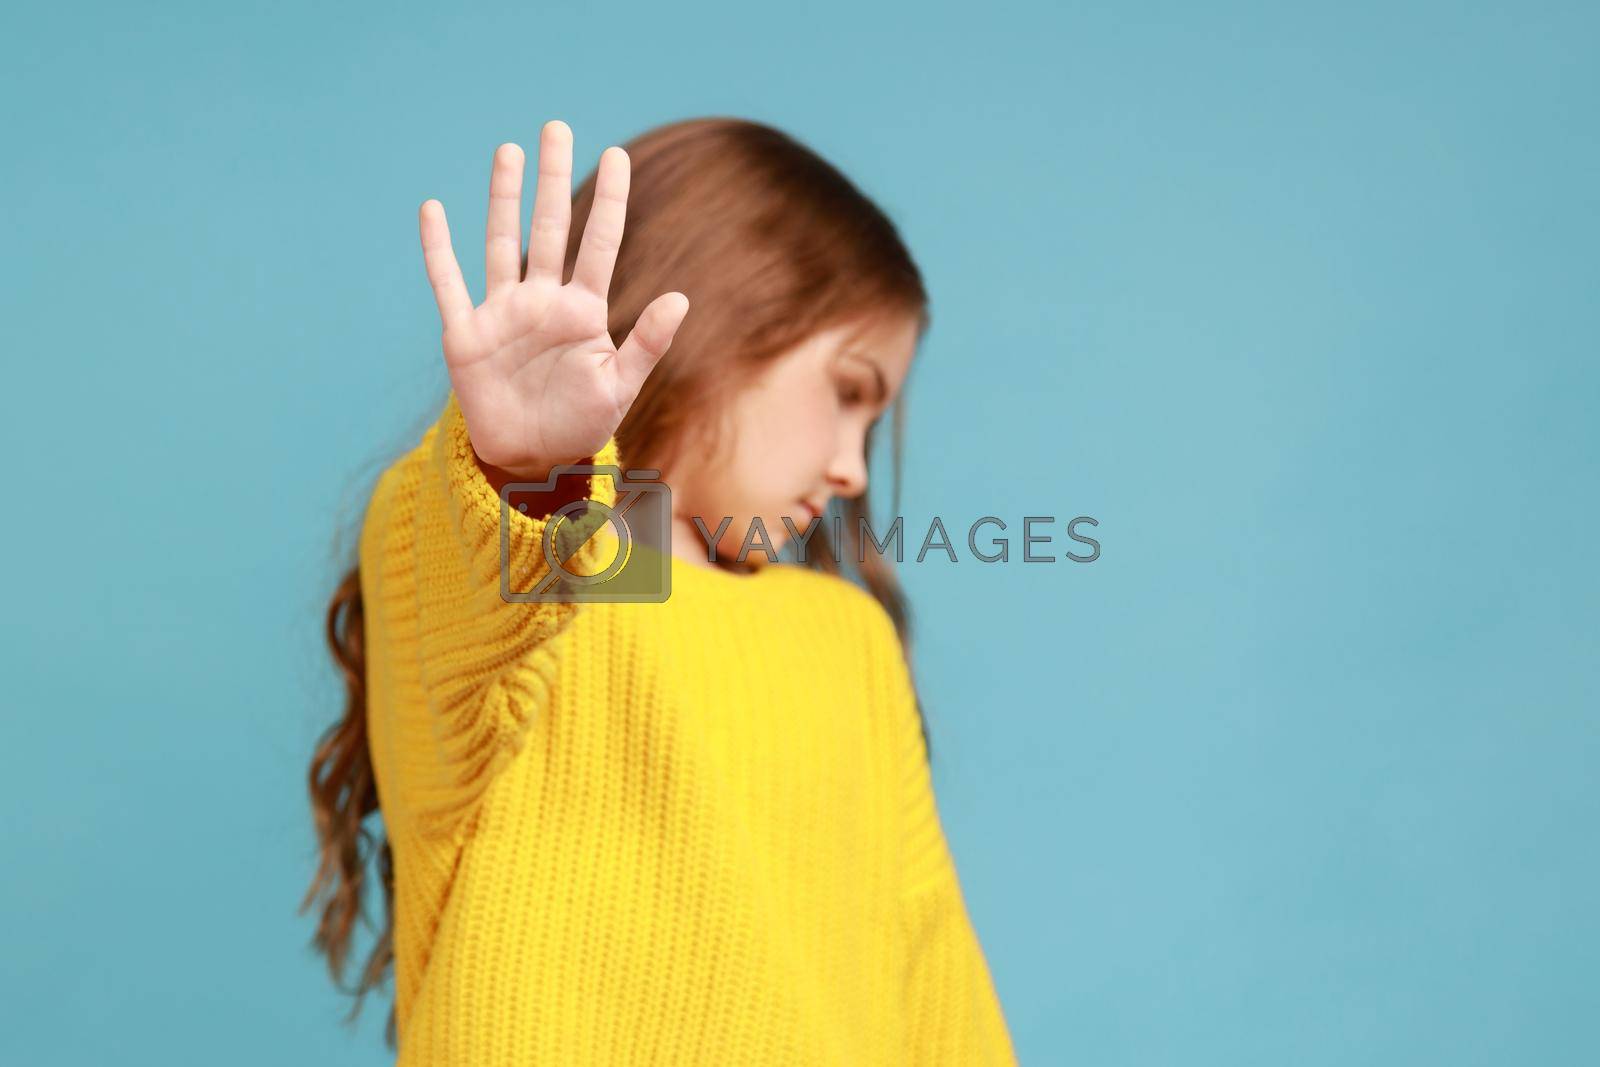 Royalty free image of Portrait of serious little girl showing stop gesture, warning to go, looking away dissatisfied. by Khosro1